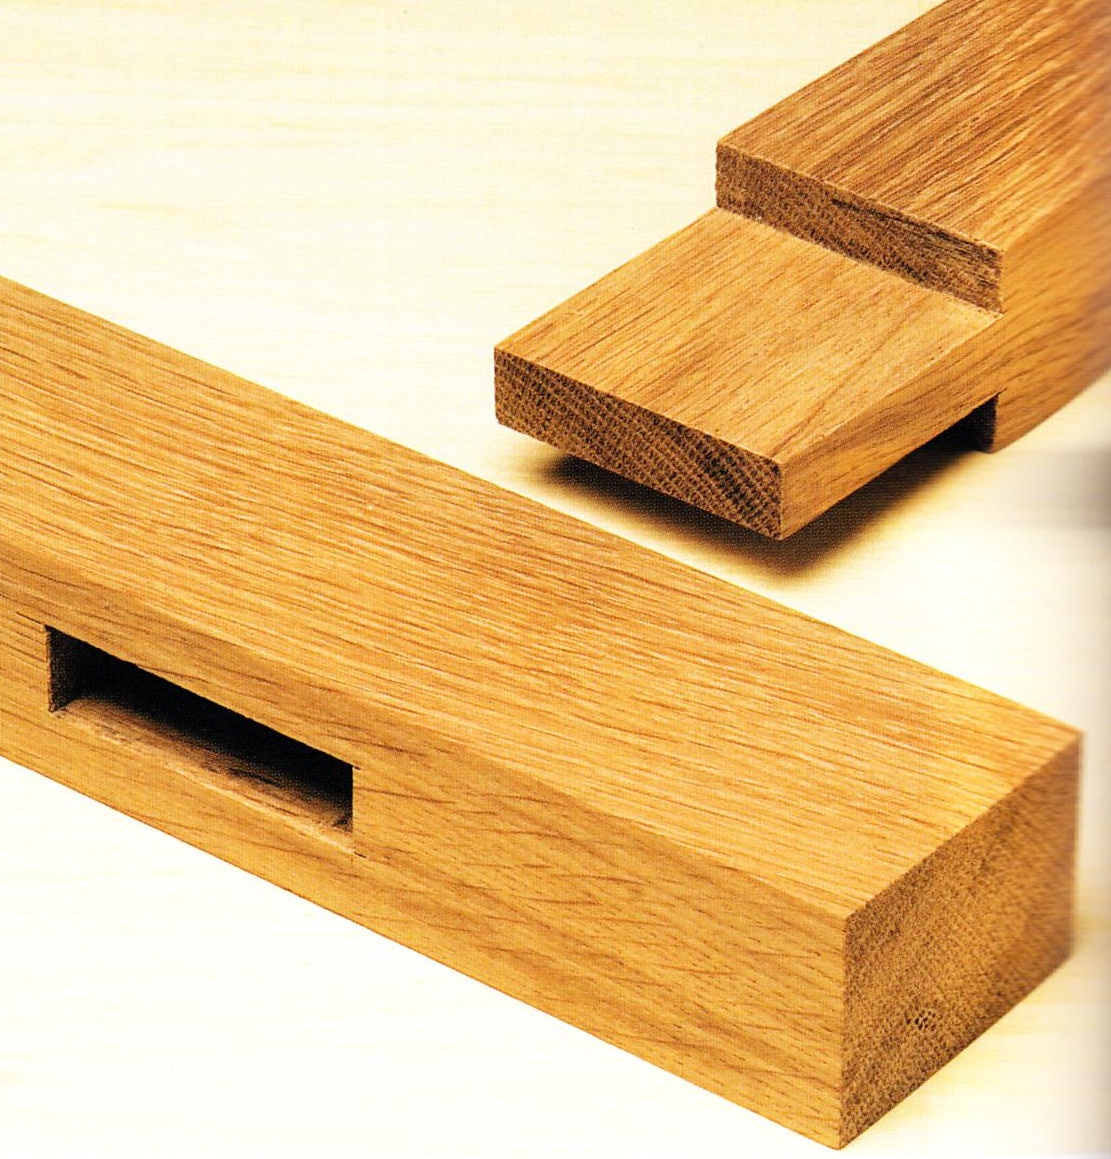 Mortise and Tenon Joint  Identifying Antique Joinery